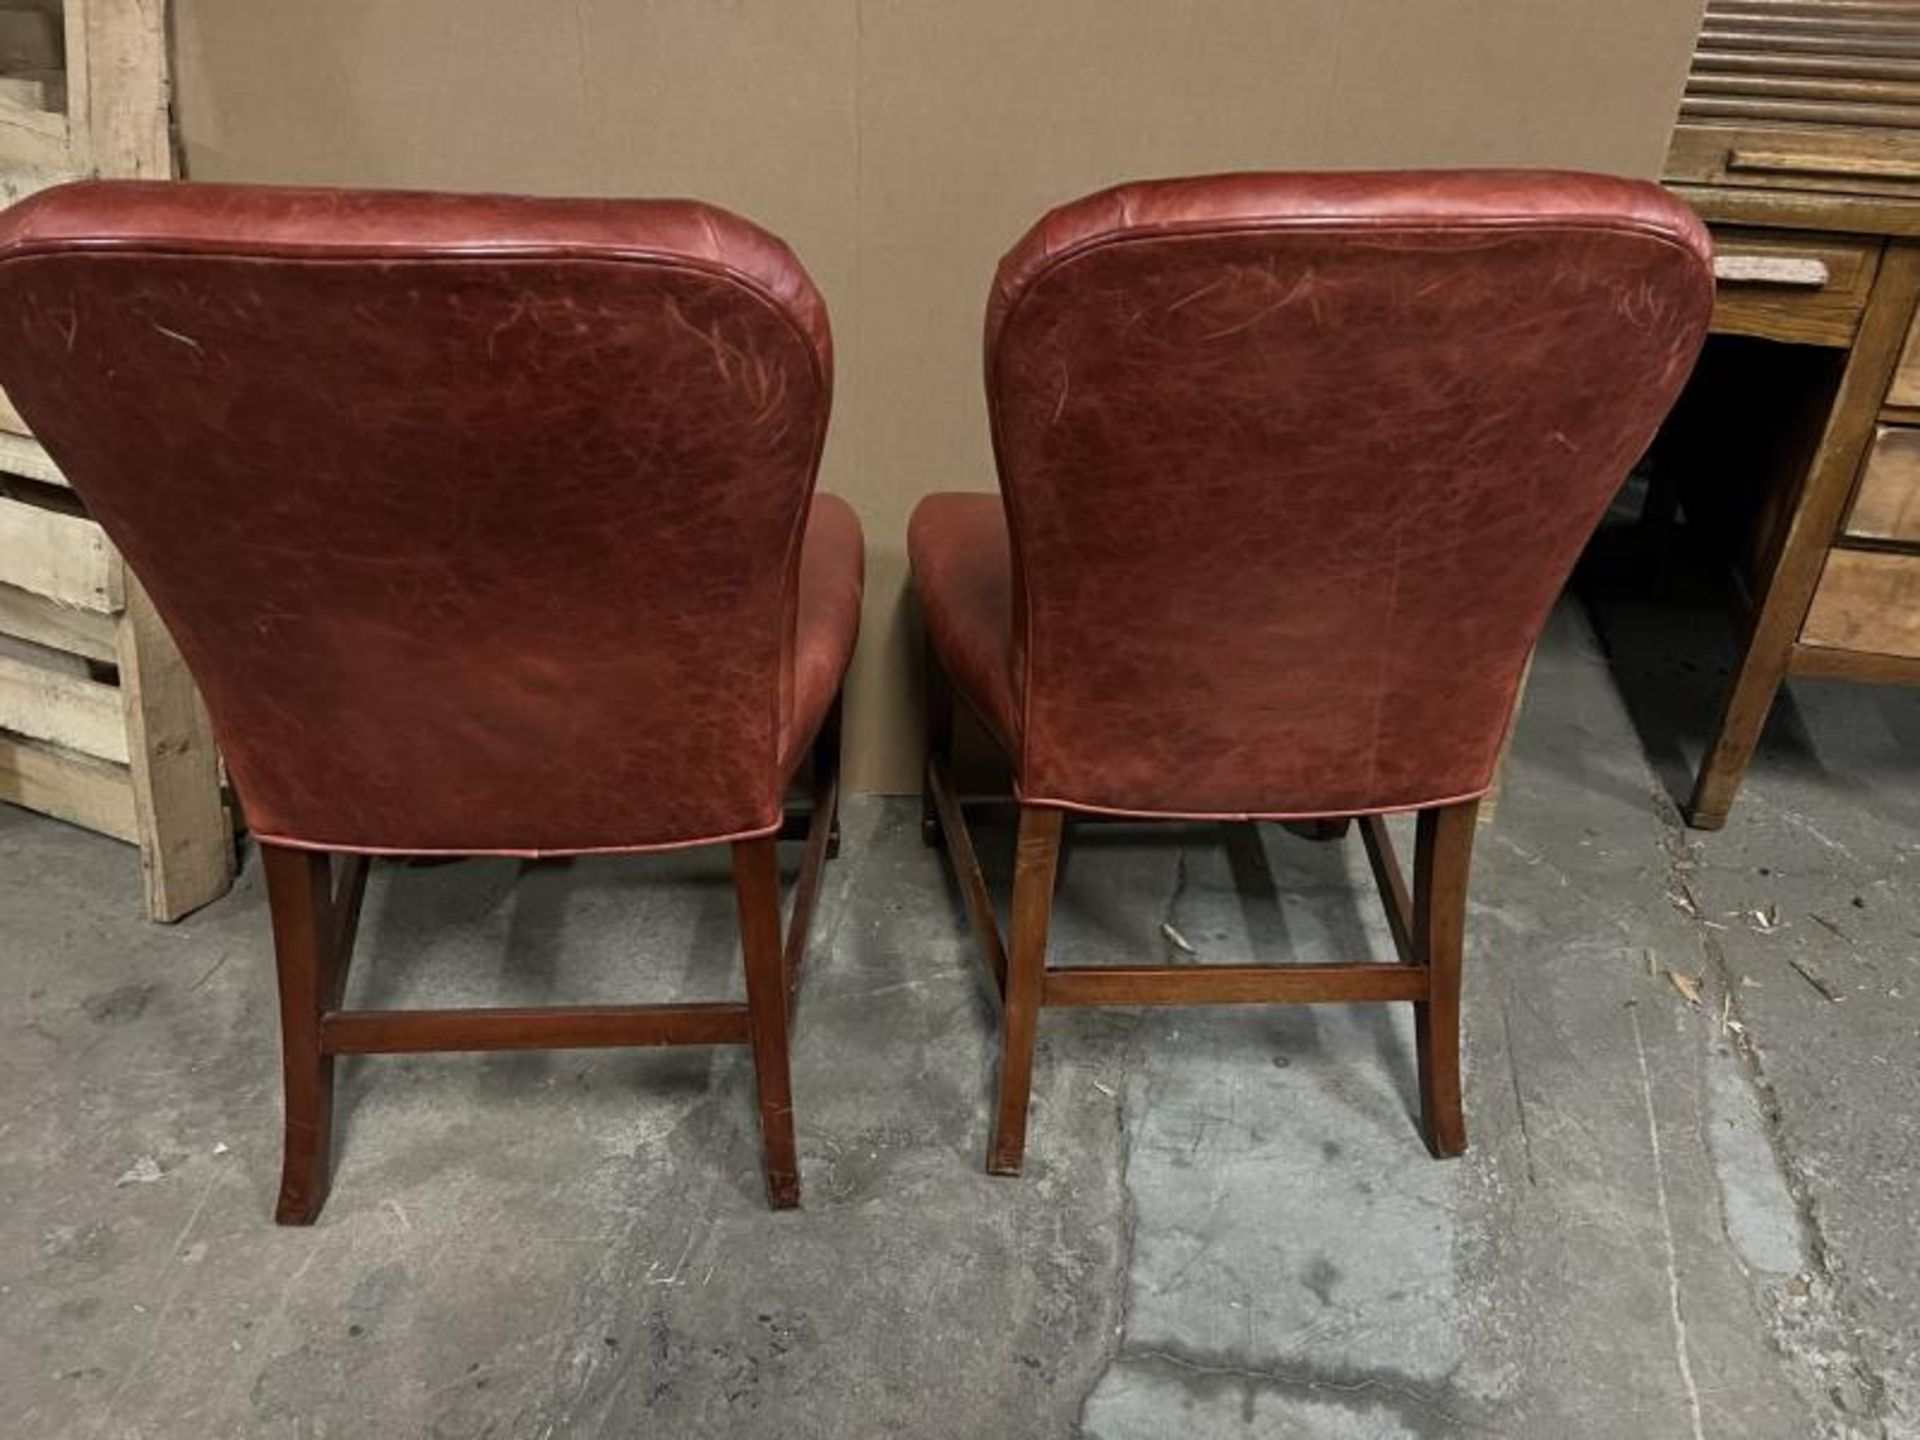 Pair of Red Vinyl Chairs; Located in Mill Building - Image 11 of 20